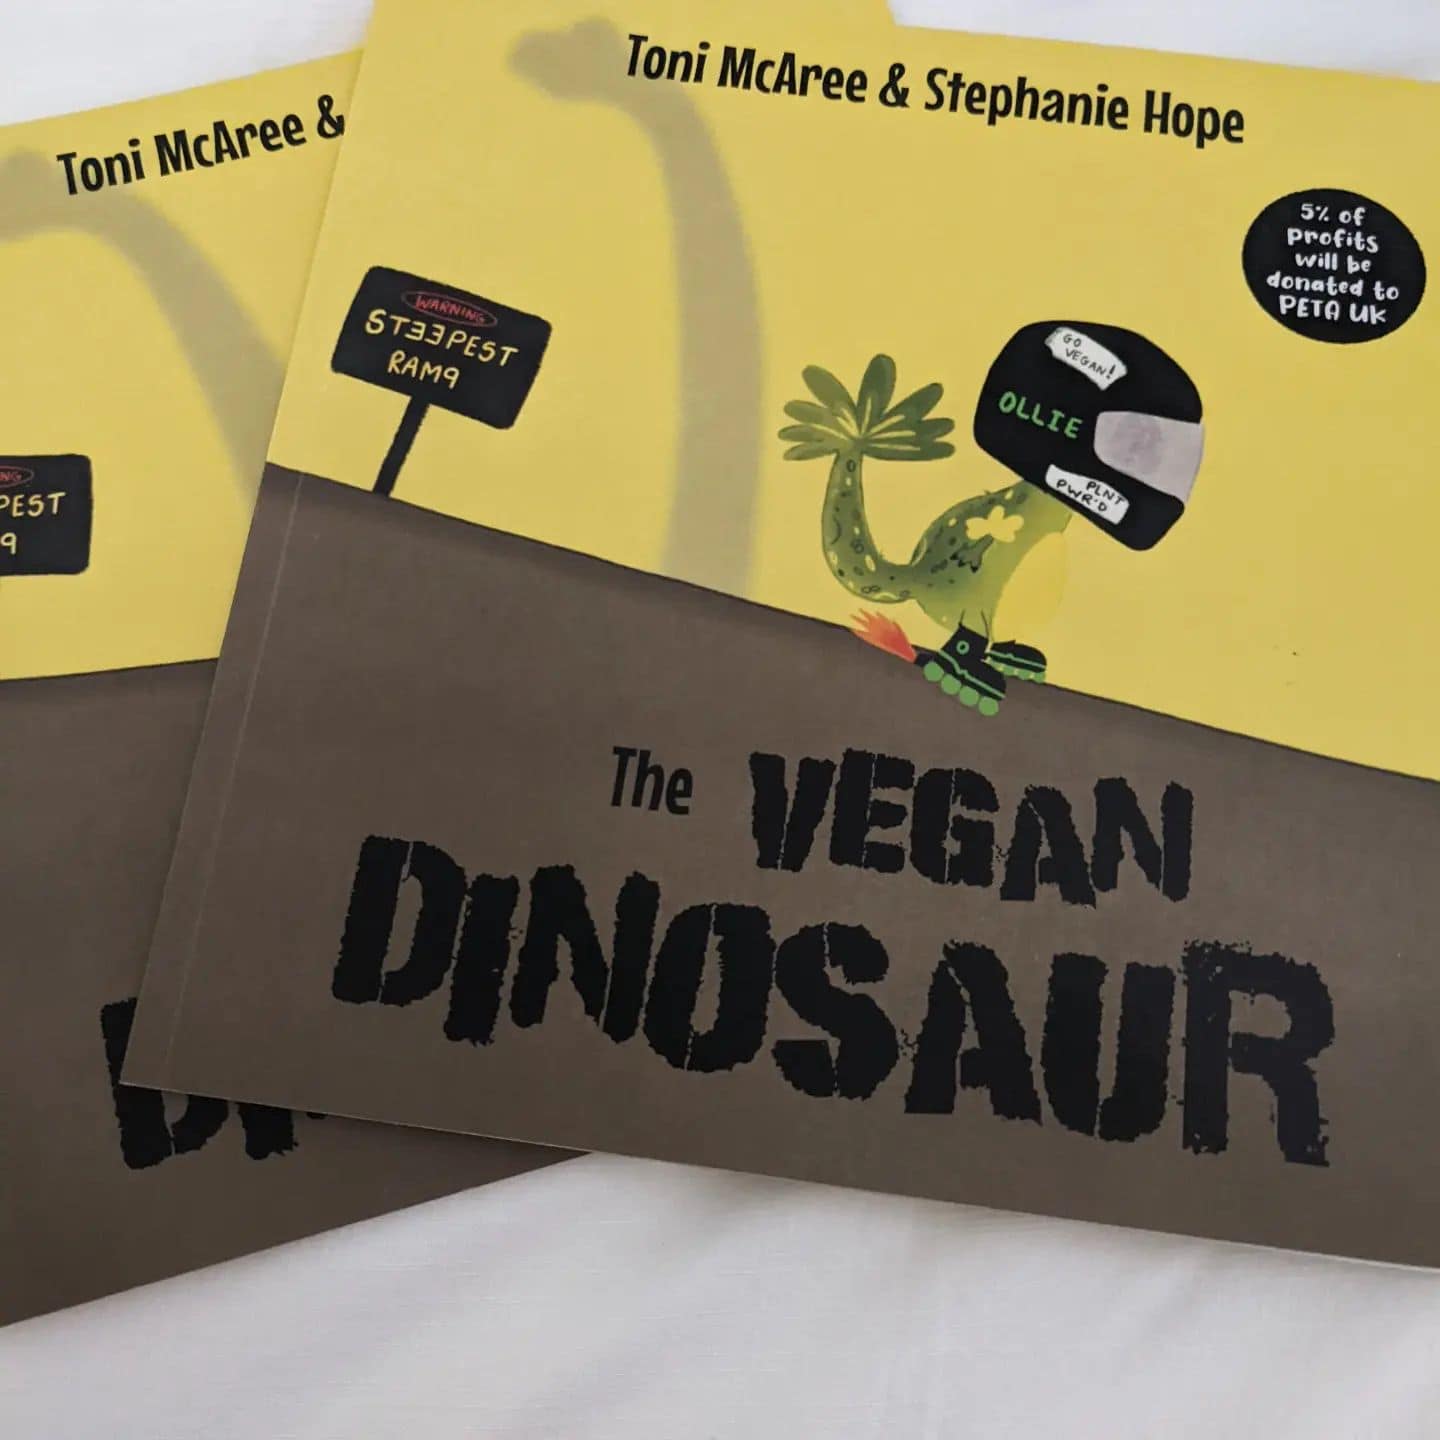 Mr 5 is going to be so excited when he finds out what came in the mail today! 🤩

This awesome kids vegan book from @olliethevegandinosaurbook is such a cute read. Mr 5 said it makes him feel good about being vegan! 

I'm so excited that I managed to get a hard copy from the UK. Aaaand I may have picked up a second copy to use for a fun give away down the track!

#veganfortheanimals #vegankidsofig #vegankids #veganfamilies #veganlife #veganmum #veganparents